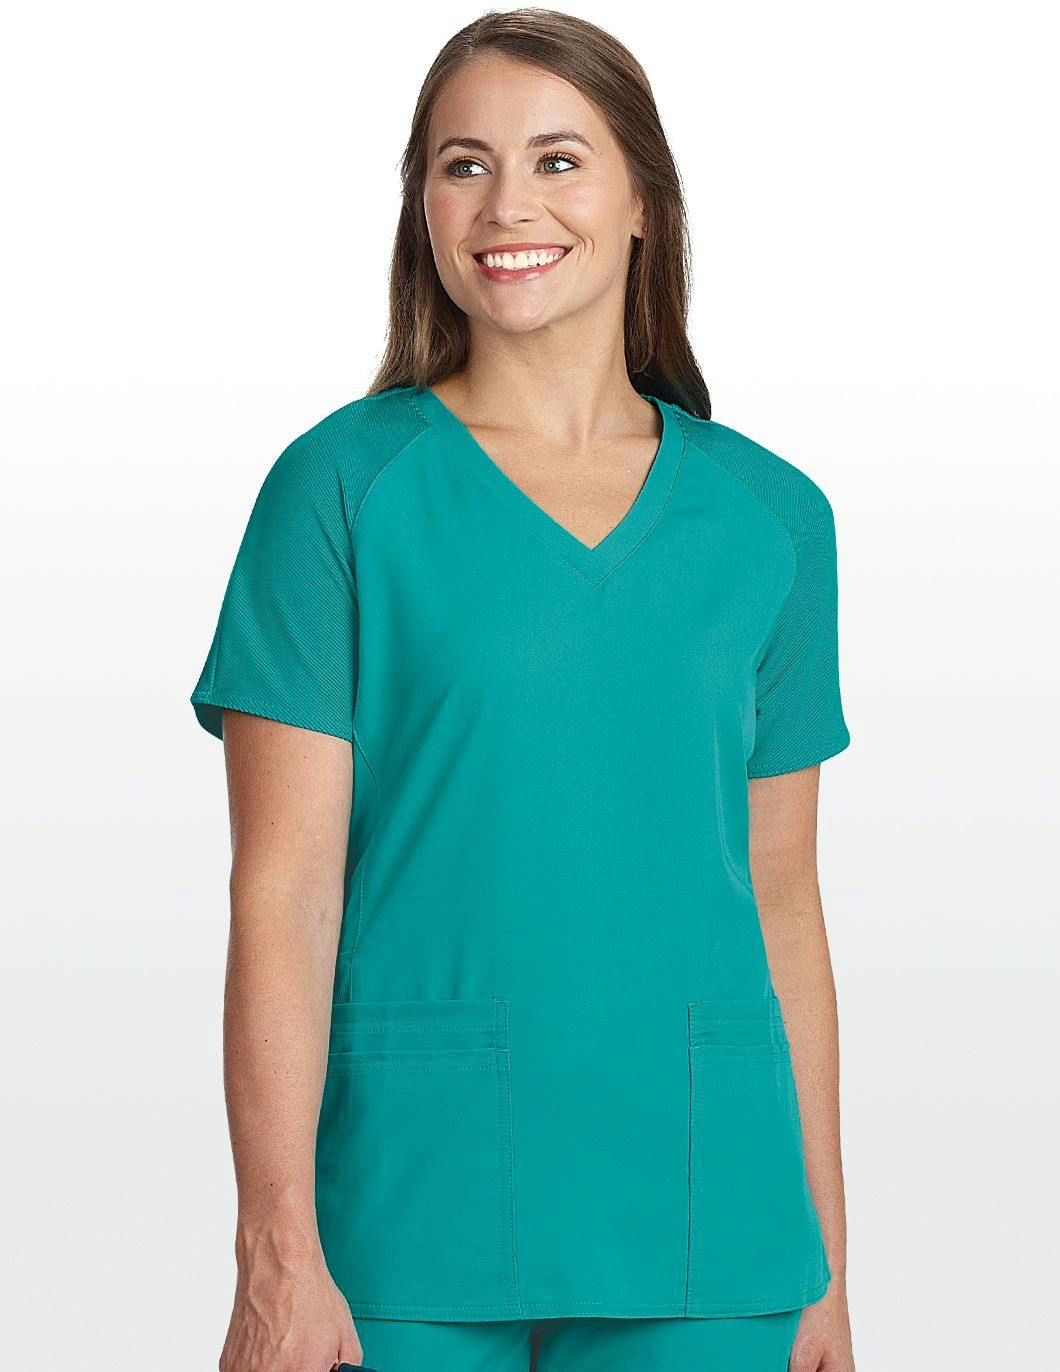 med-couture-touch-raglan-sleeve-top-teal